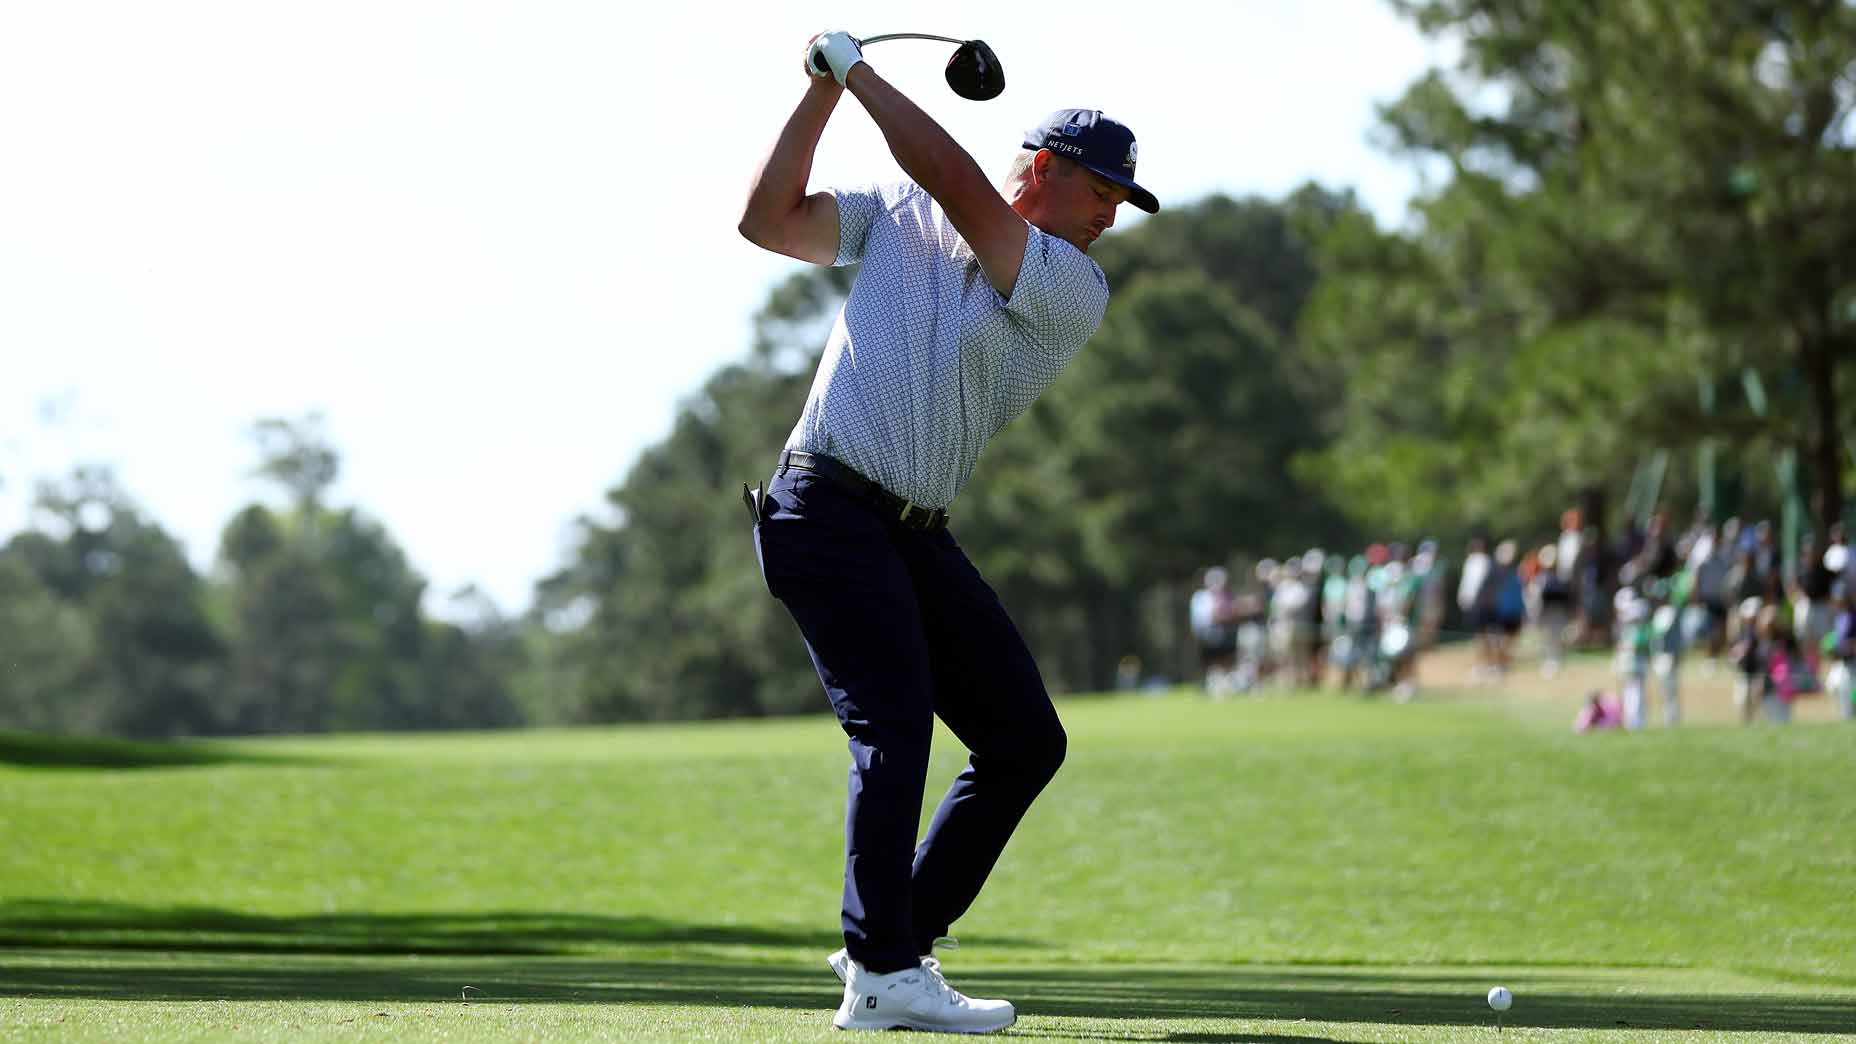 bryson dechambeau hits a tee shot during round 2 of the 2024 Masters